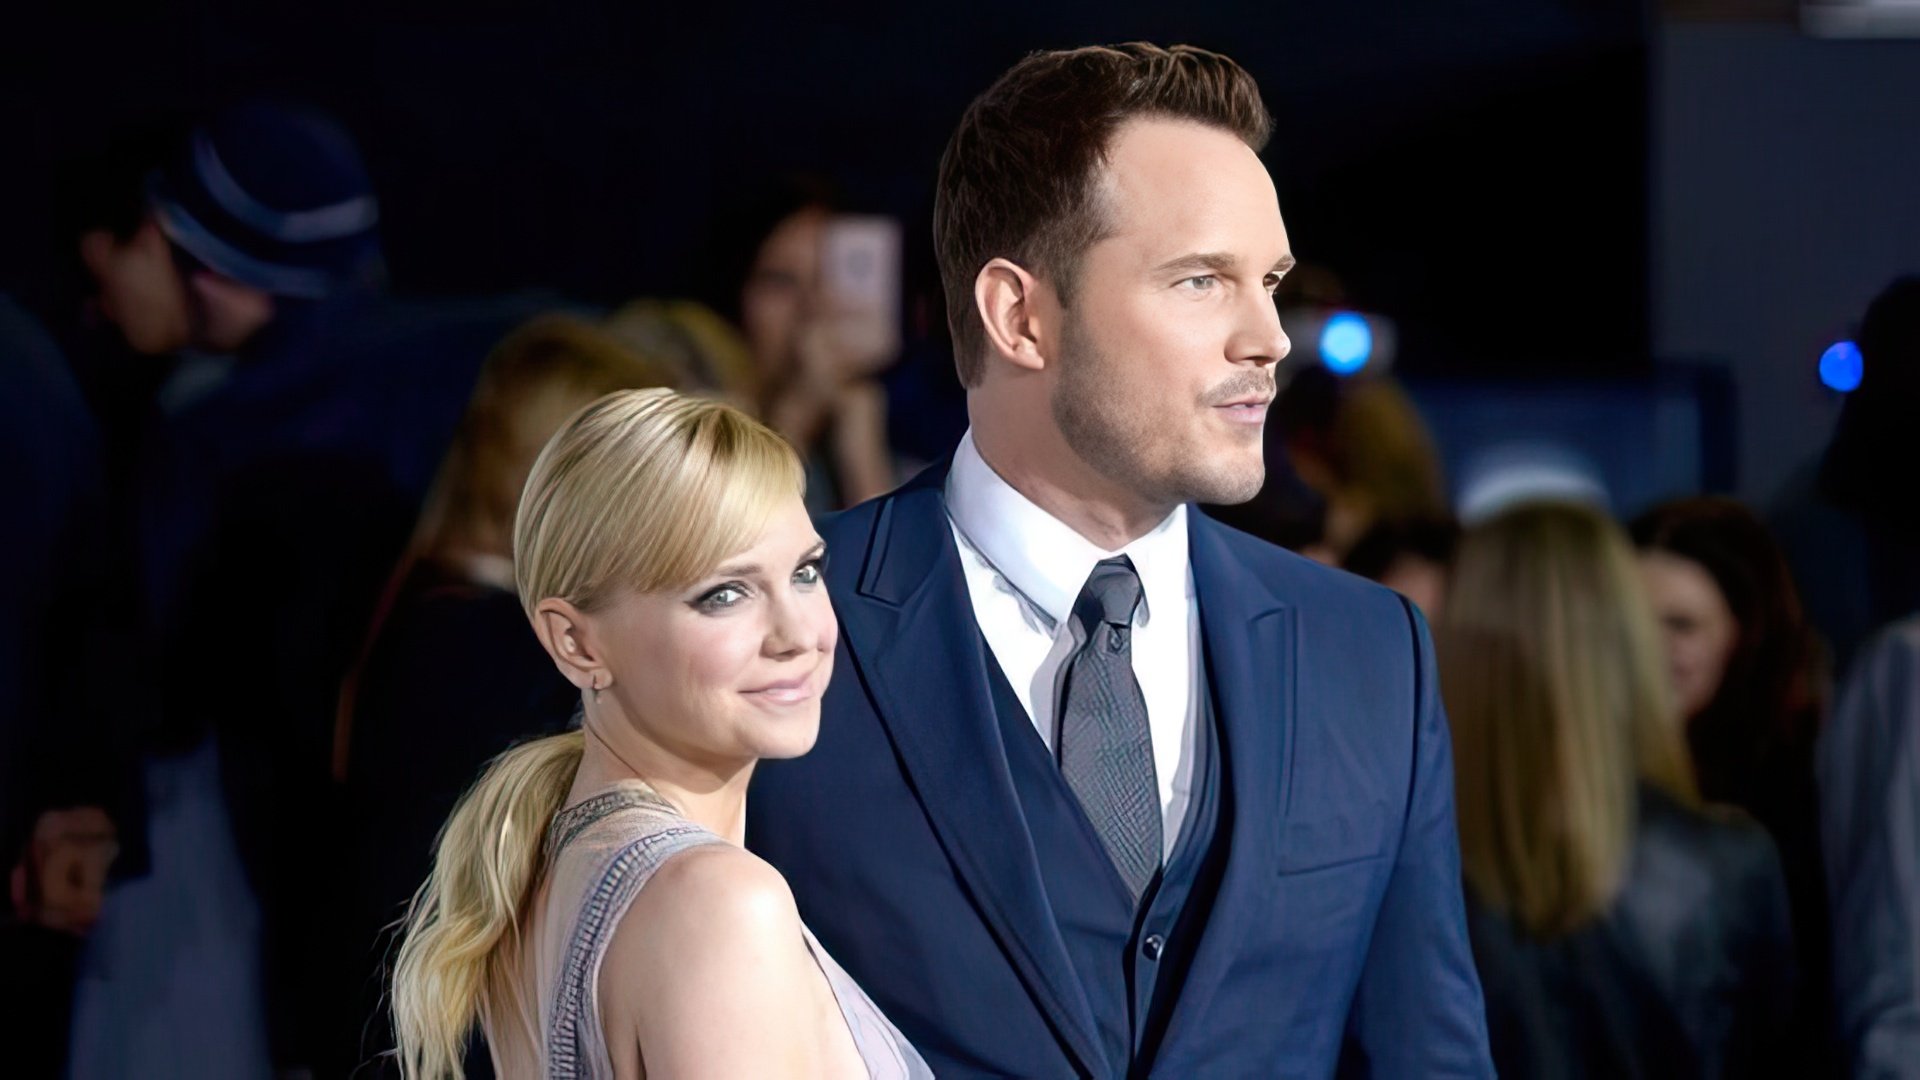 The marriage of Anna Faris and Chris Pratt broke up after 10 years